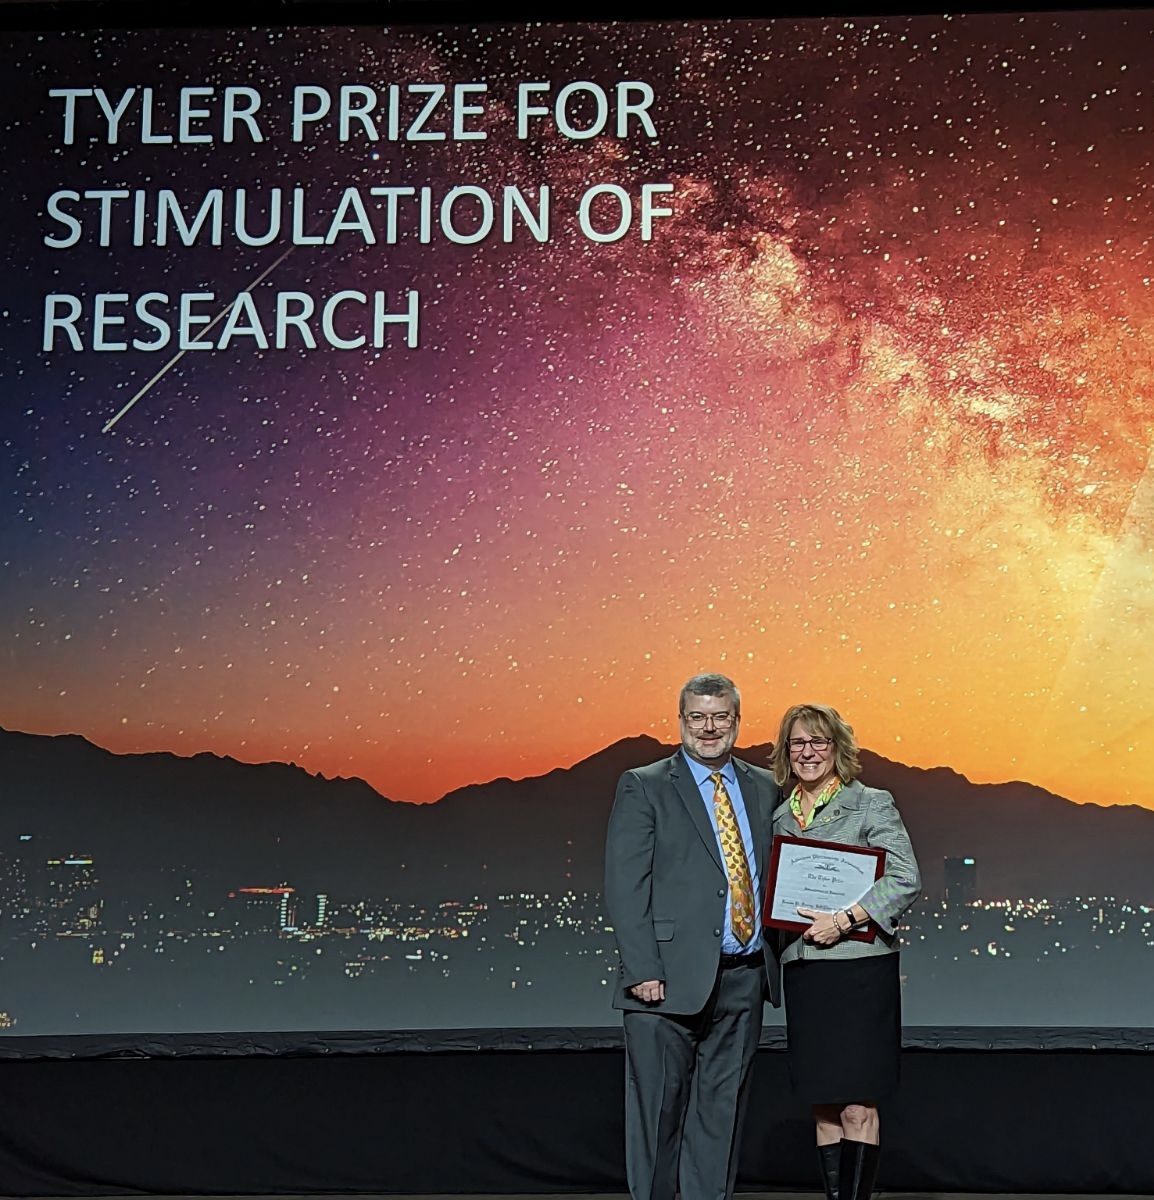 Dr. Karen Farris recieves the Tyler Prize for Stimulation of Research